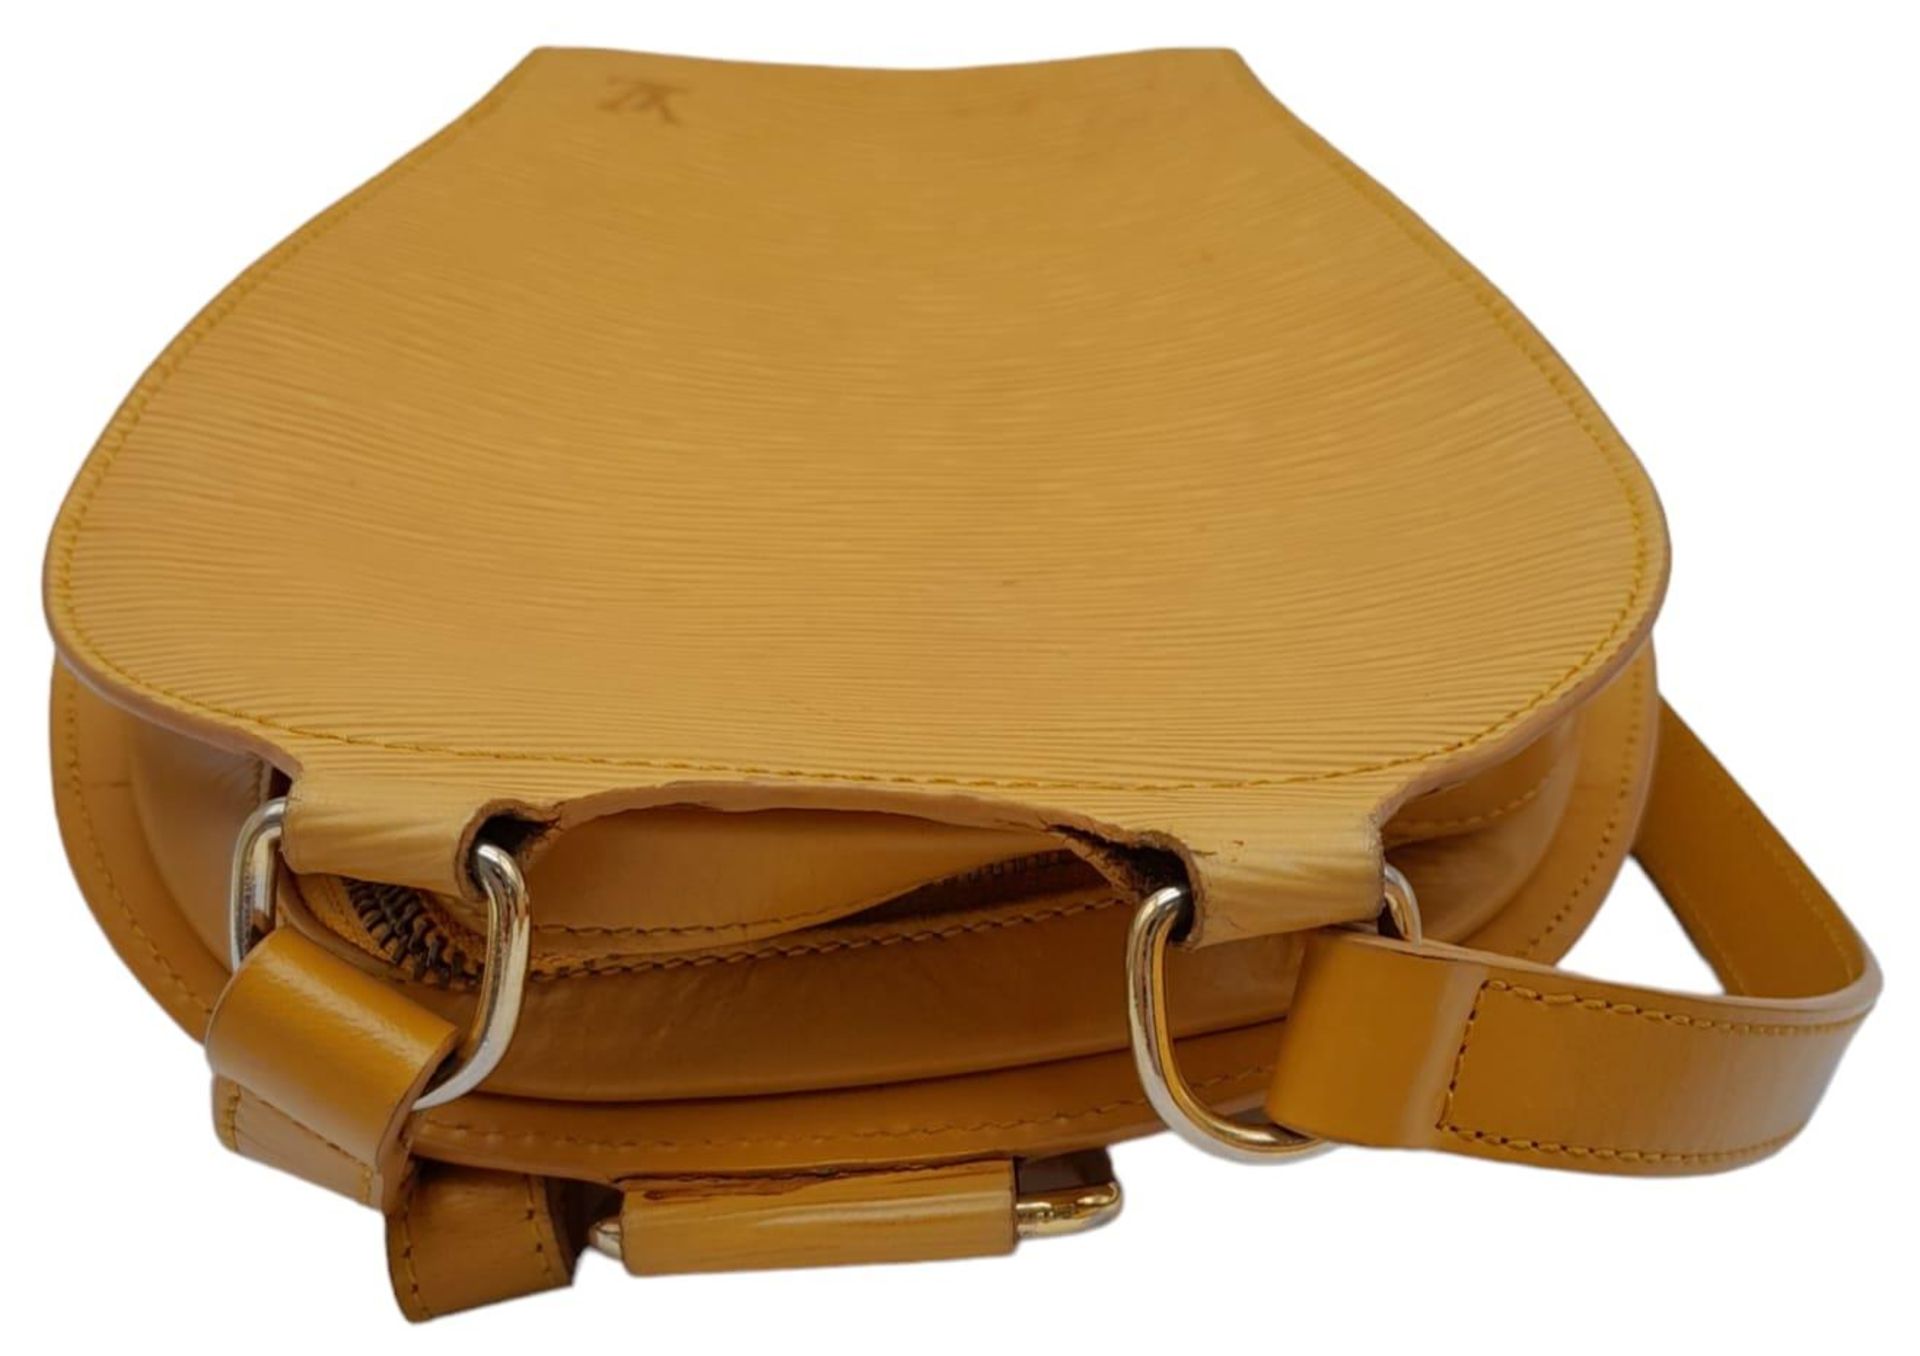 A Louis Vuitton Yellow 'Mabillon' Backpack. Epi leather exterior with gold-toned hardware, the - Image 4 of 9